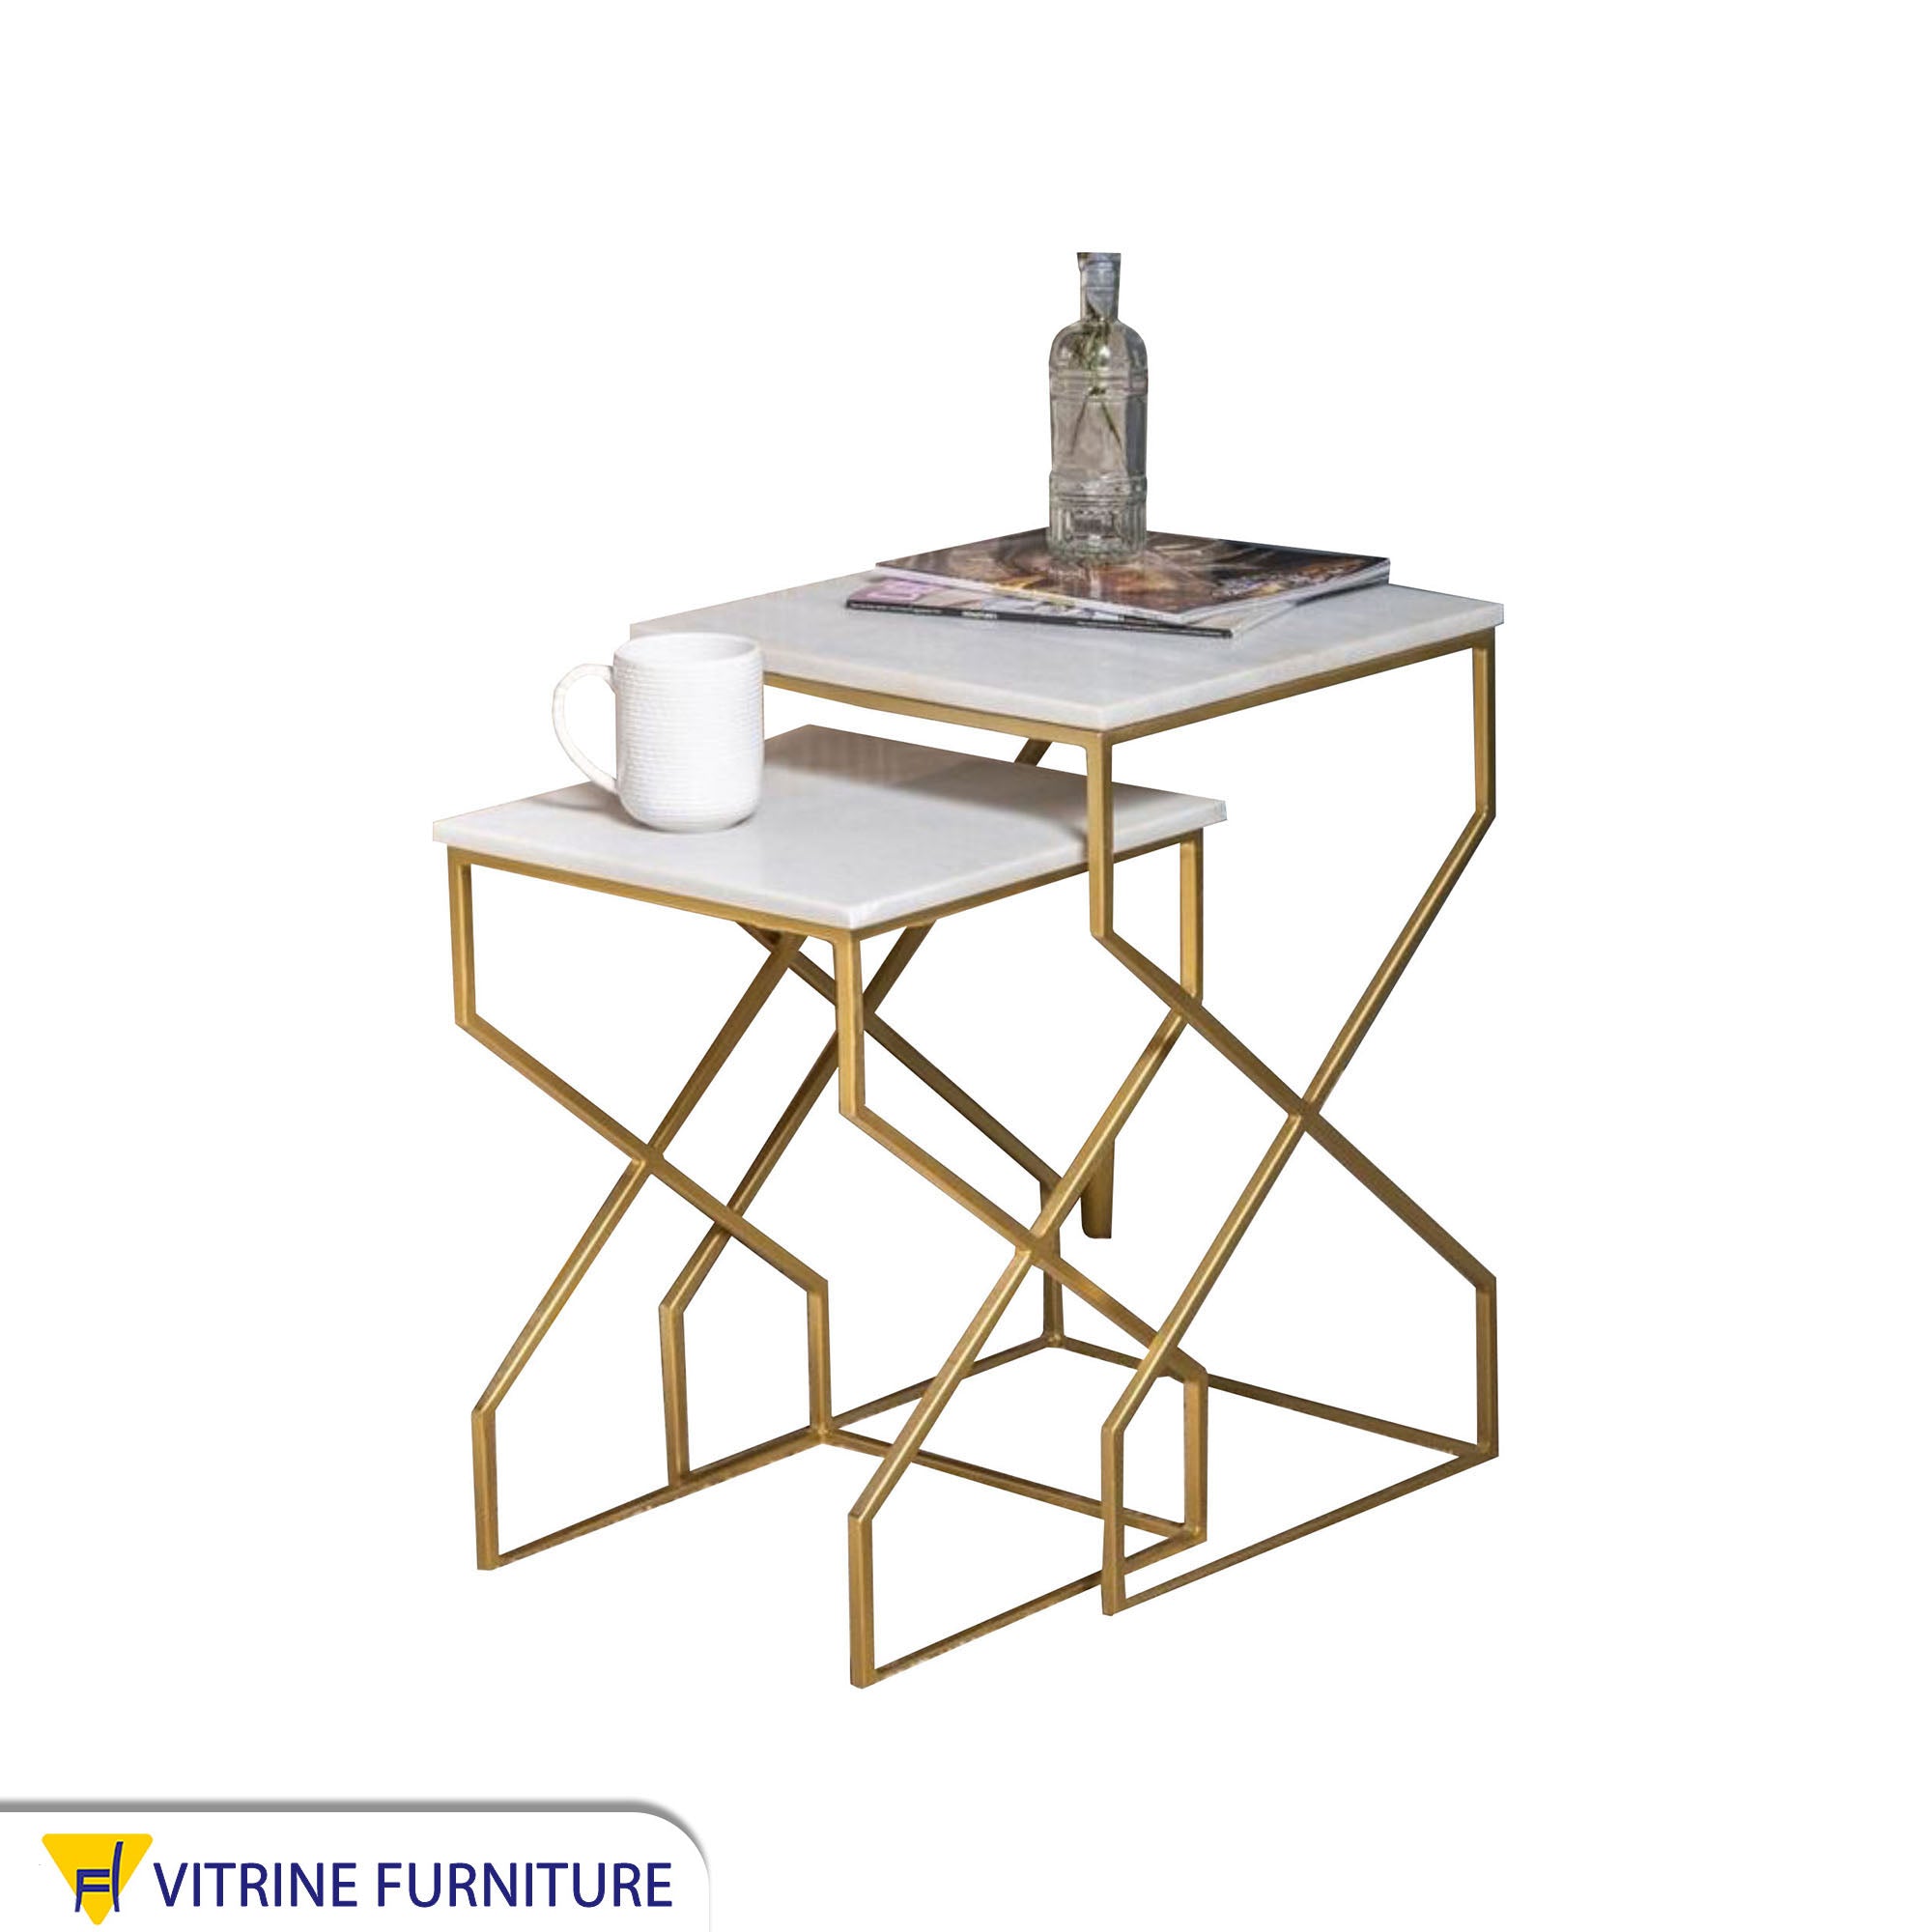 Gold metal tables